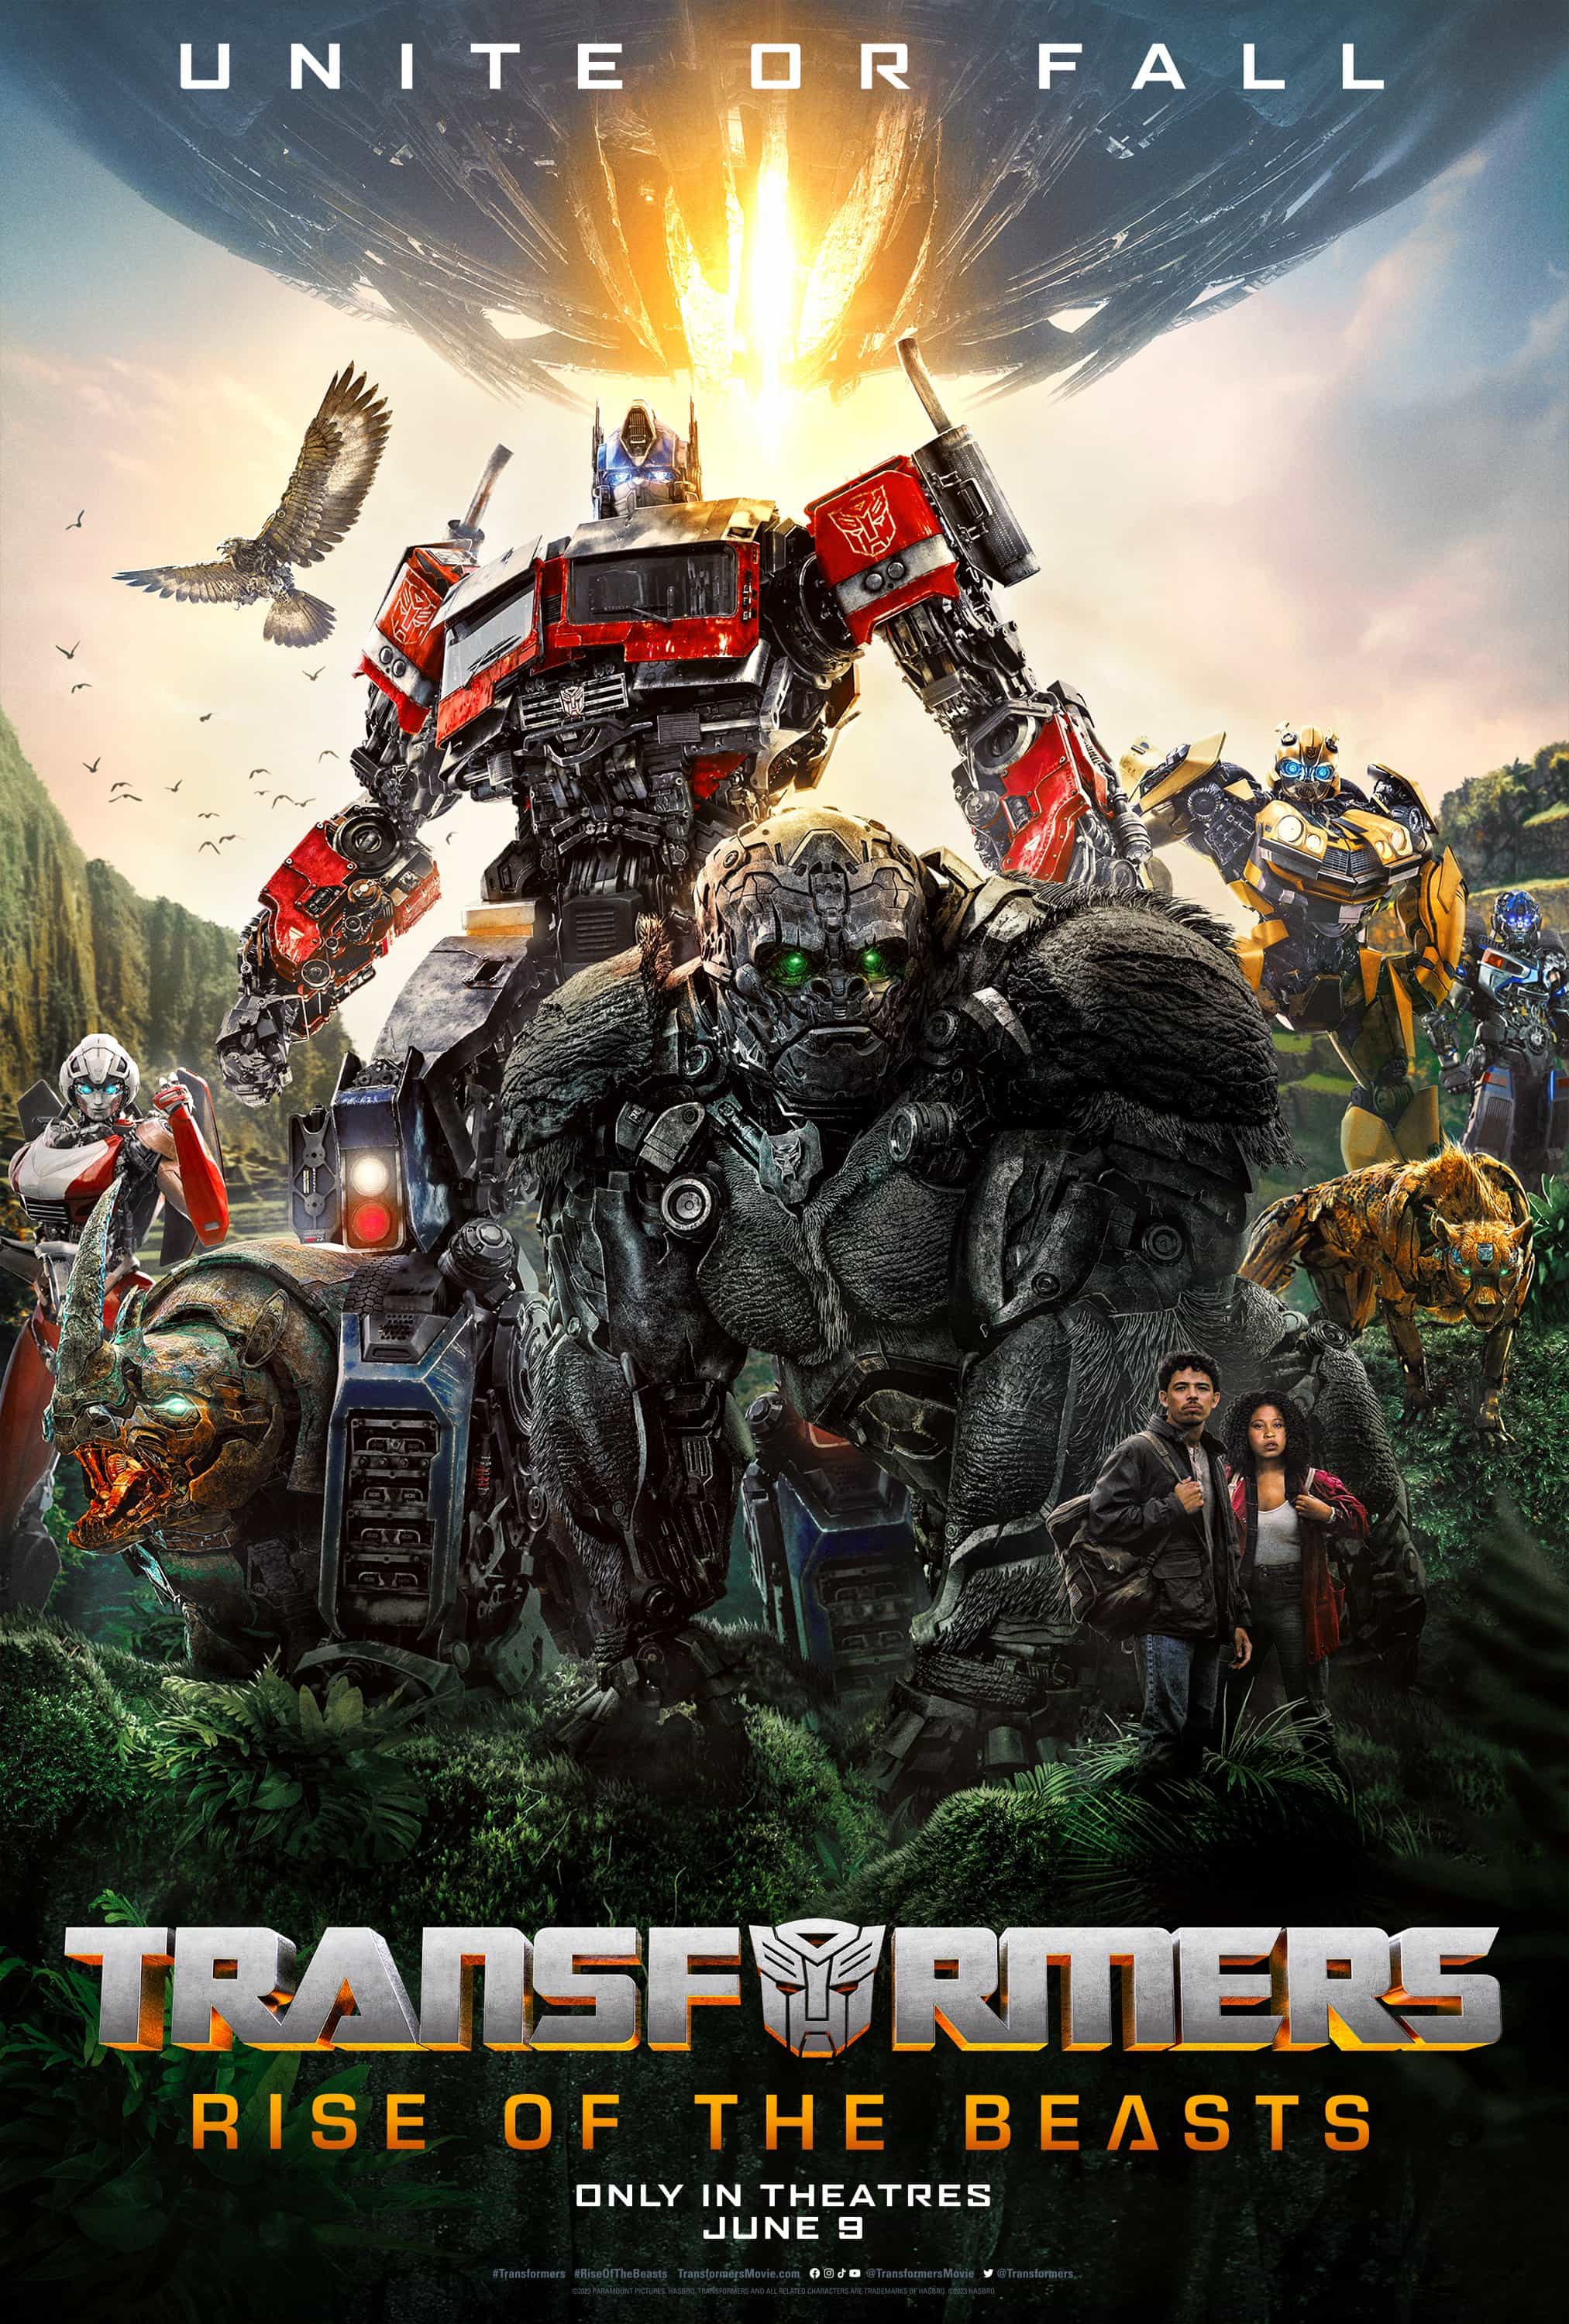 Global Box Office Weekend Report 9th - 11th June 2023:  Transformers: Rise of the Beasts hits the top of the global box office with a $170 Million debut weekend